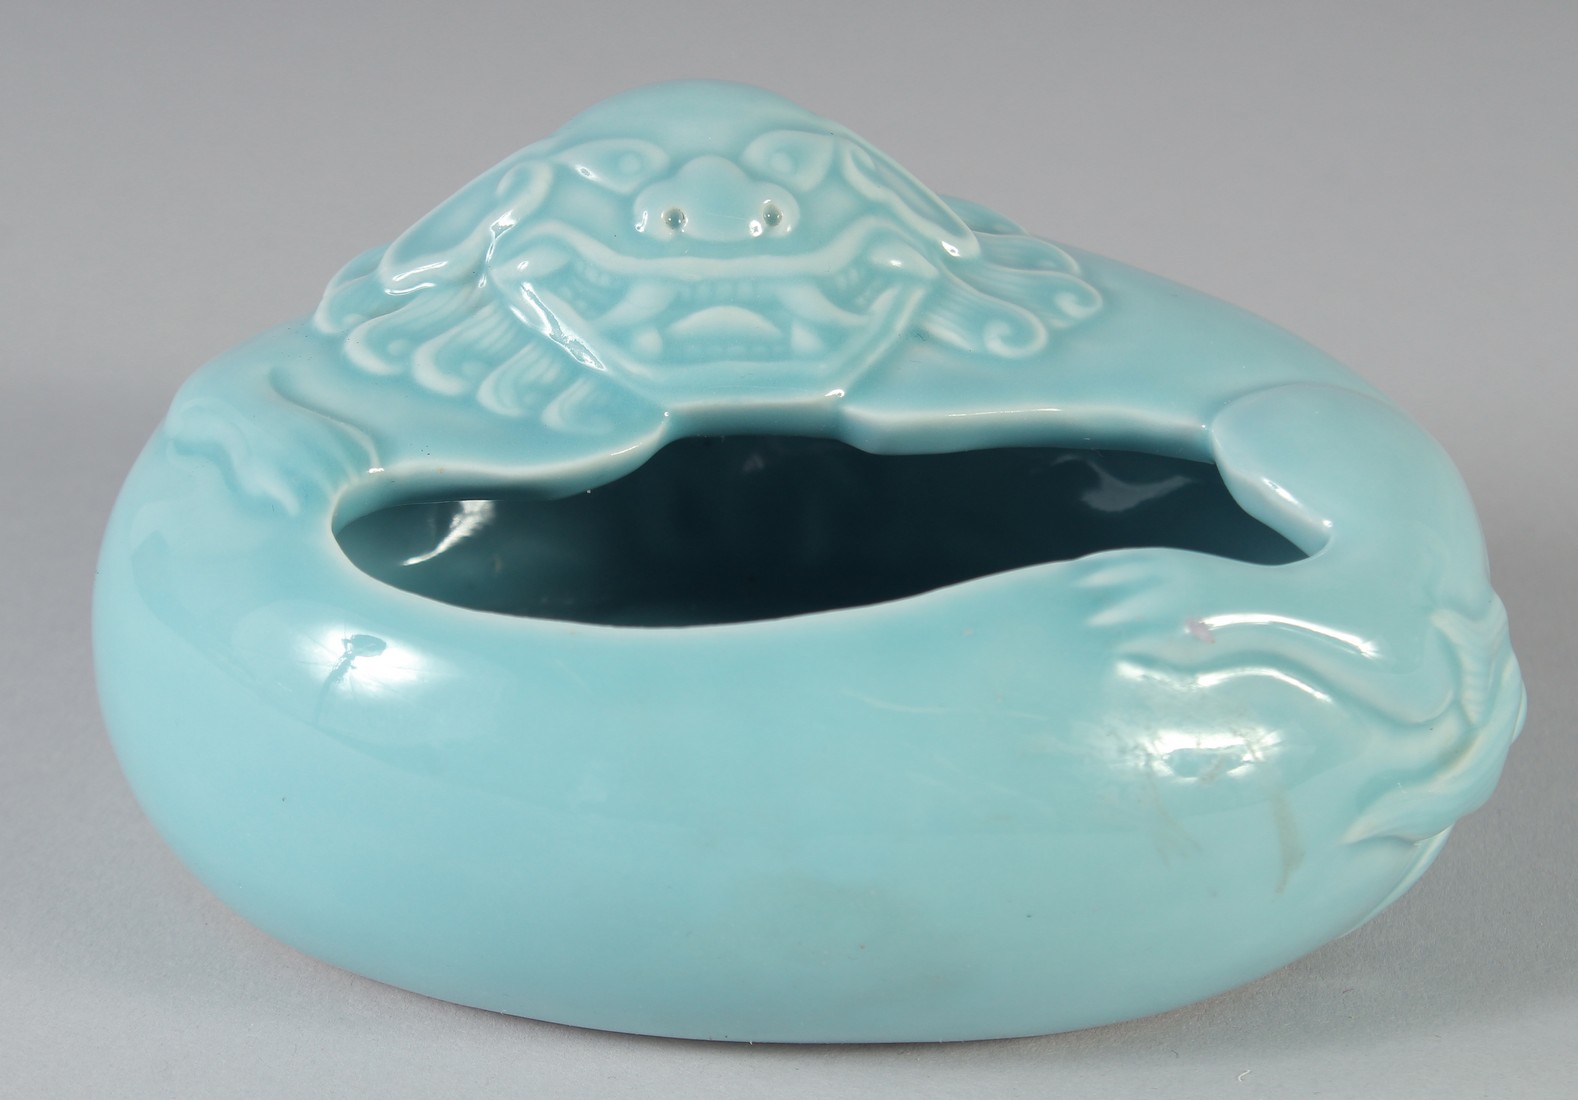 A CHINESE CLAIRE-DE-LUNE OVAL SECTION PORCELAIN BRUSH WASHER, moulded in relief with a Buddhistic